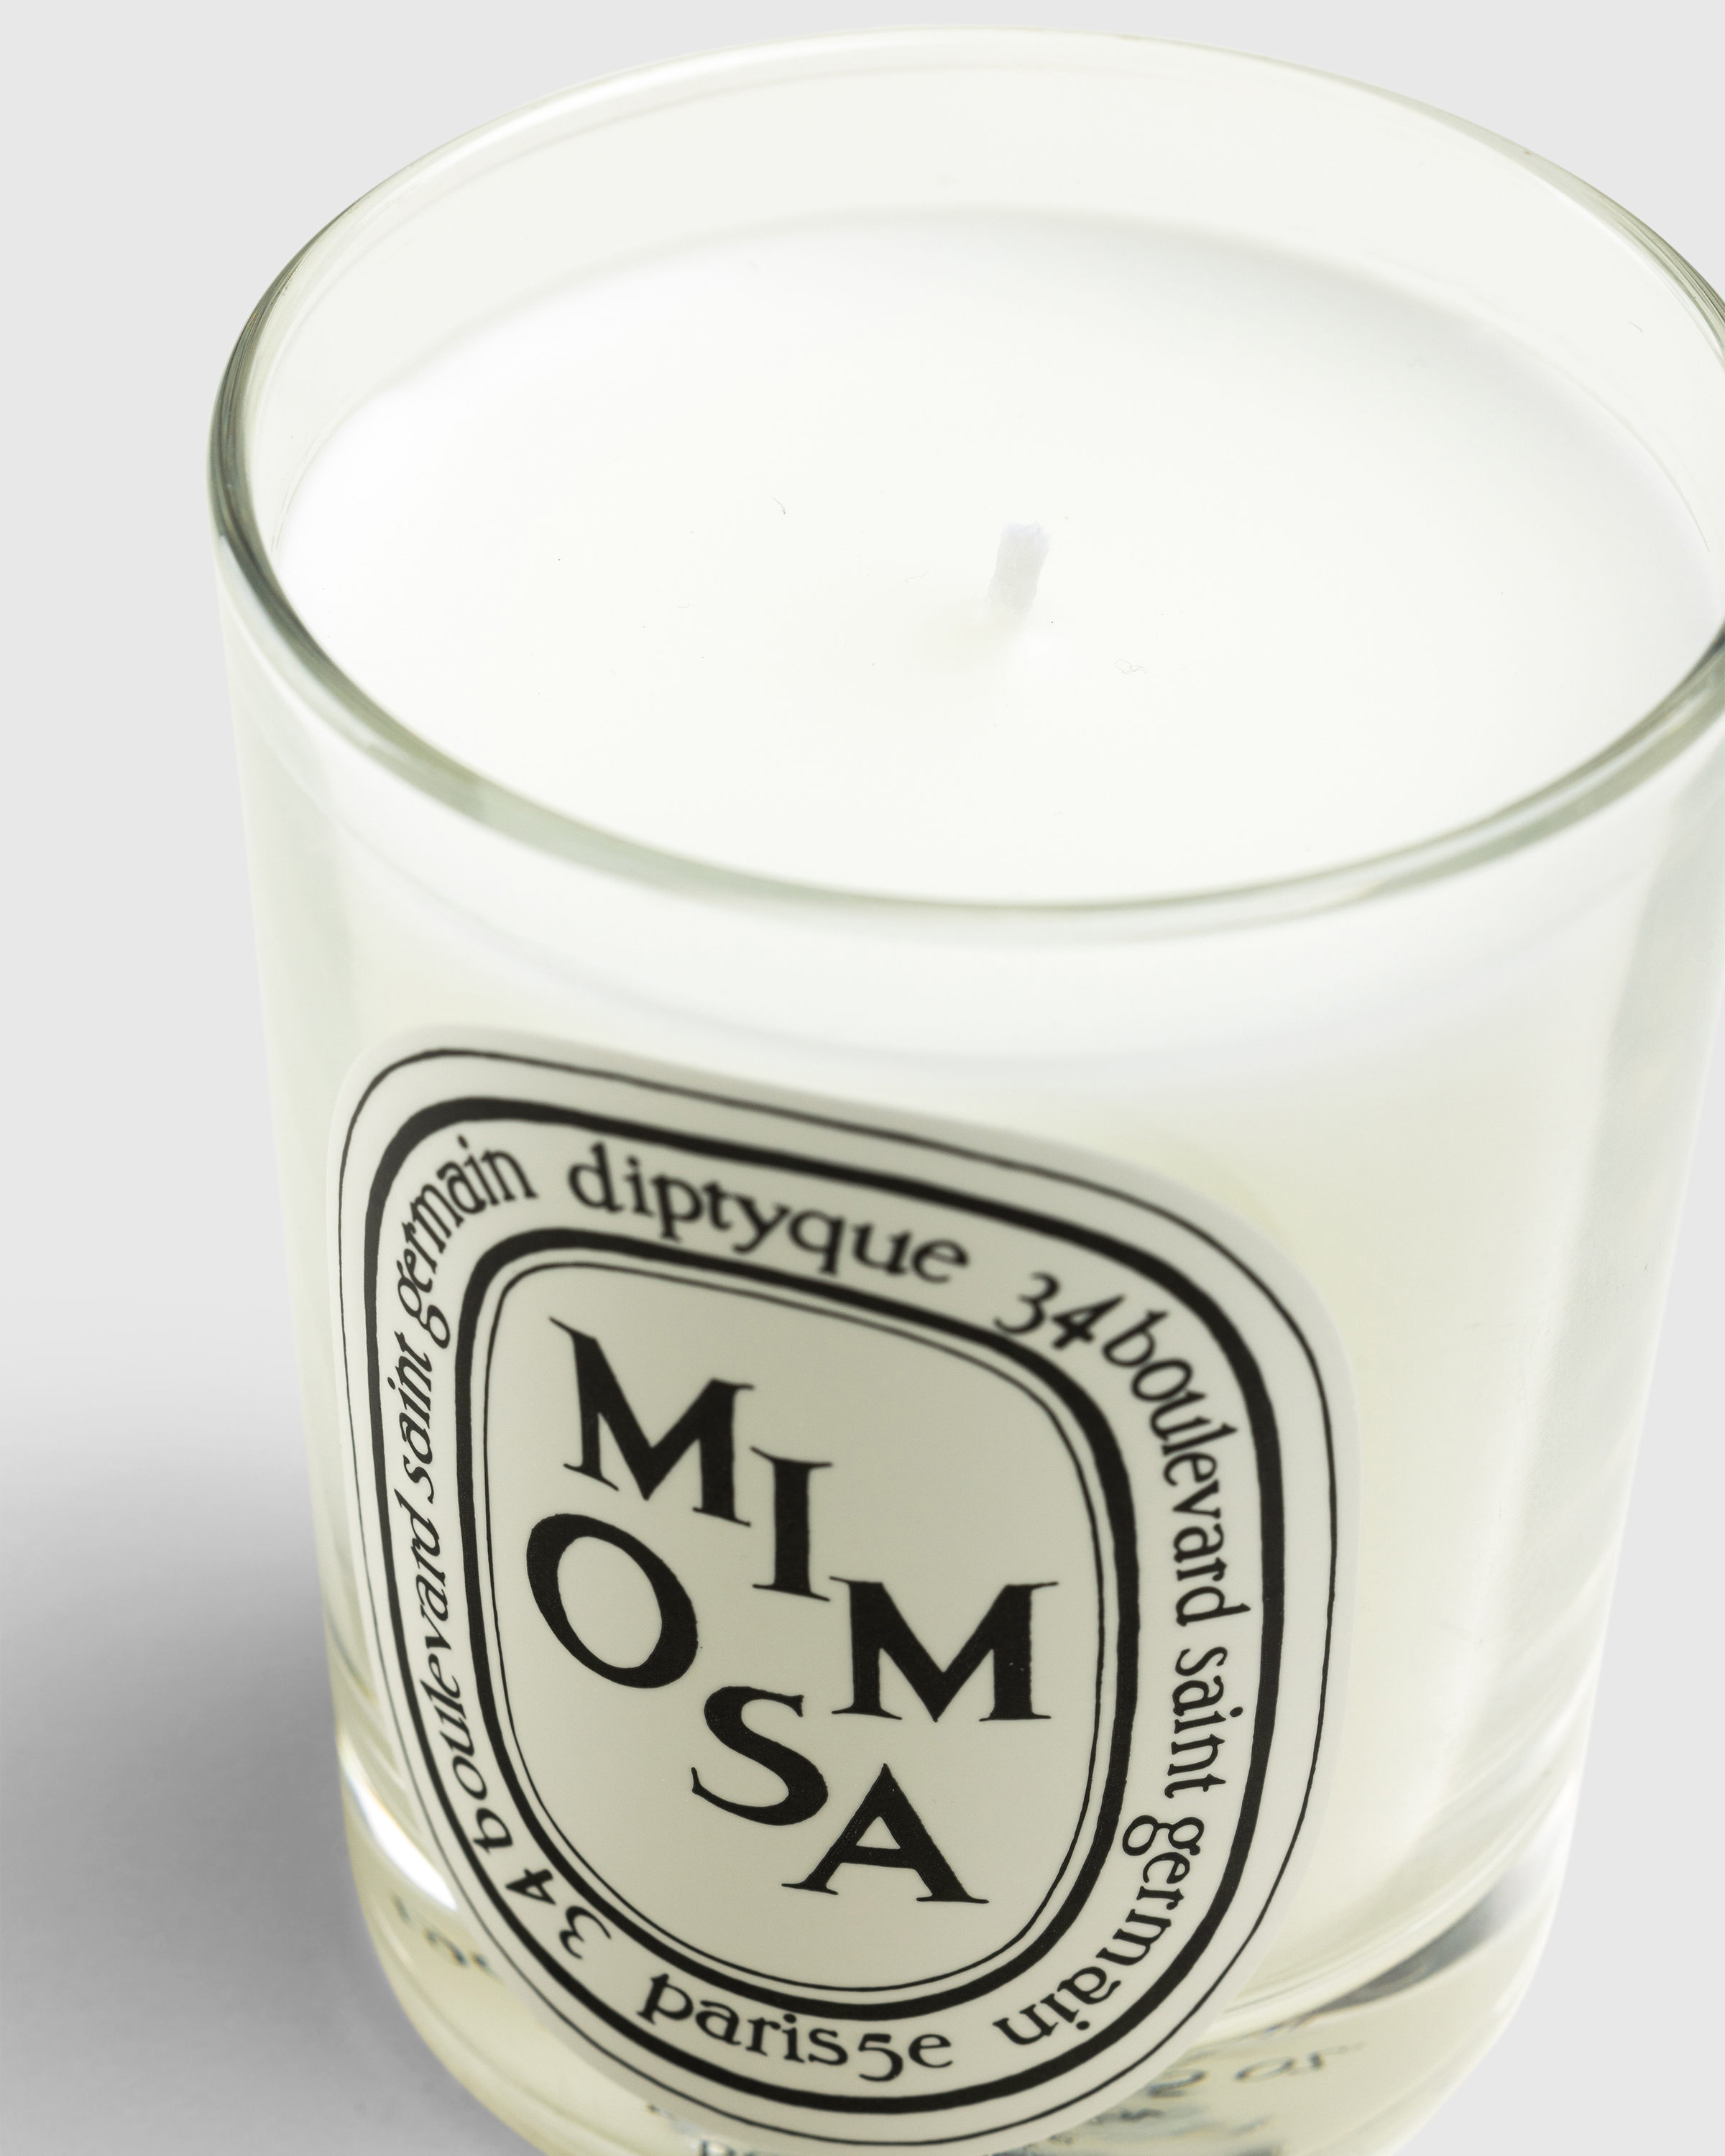 Diptyque – Standard Candle Mimosa 190g - Candles & Fragrances - Transparent - Image 2